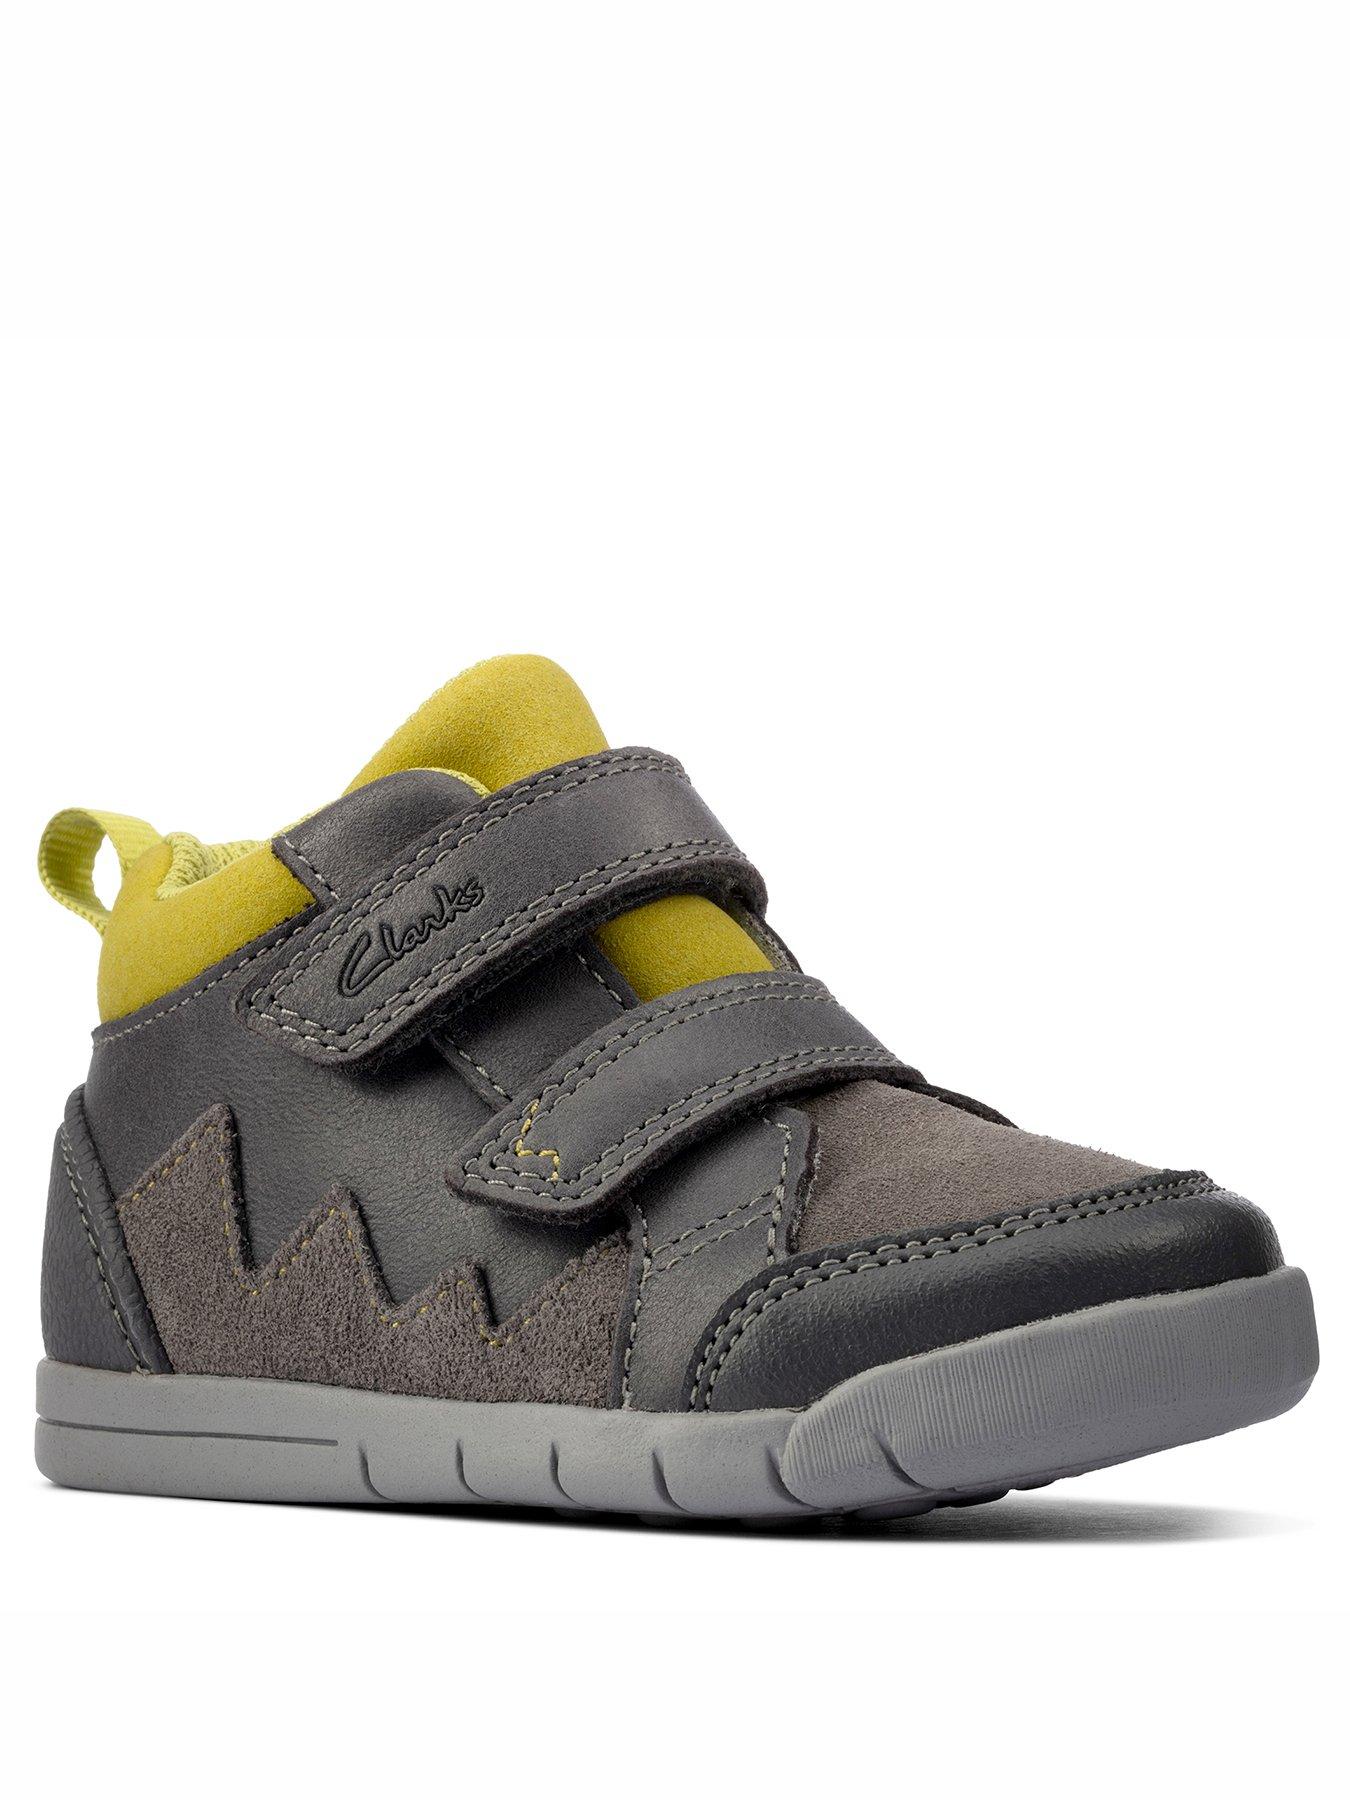 Shoes & boots Rex Park Toddler Boot - Grey